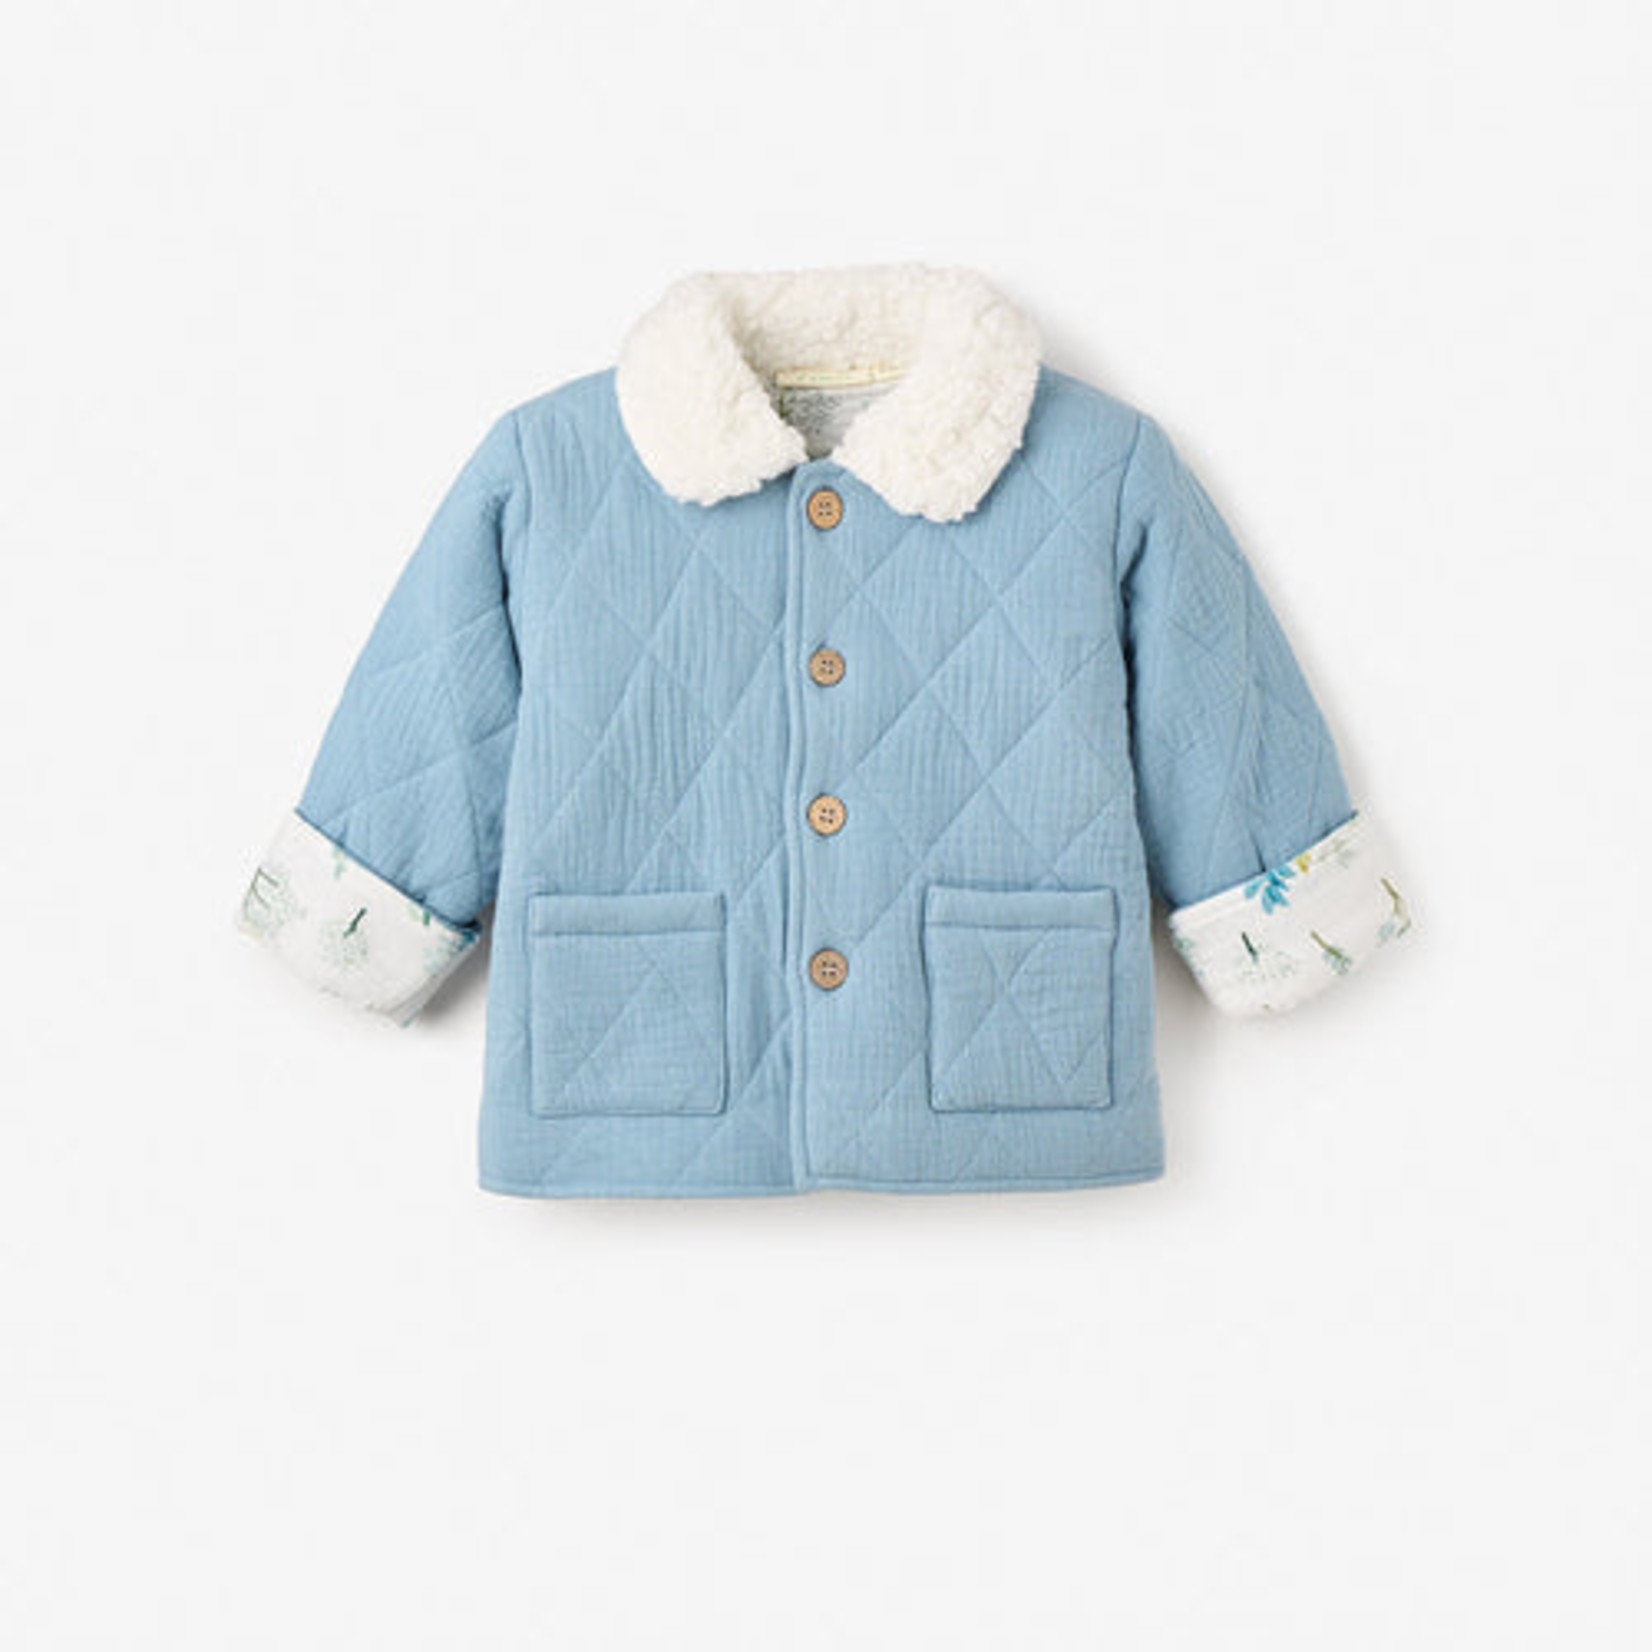 Treehouse Org. Muslin Quilted Jacket